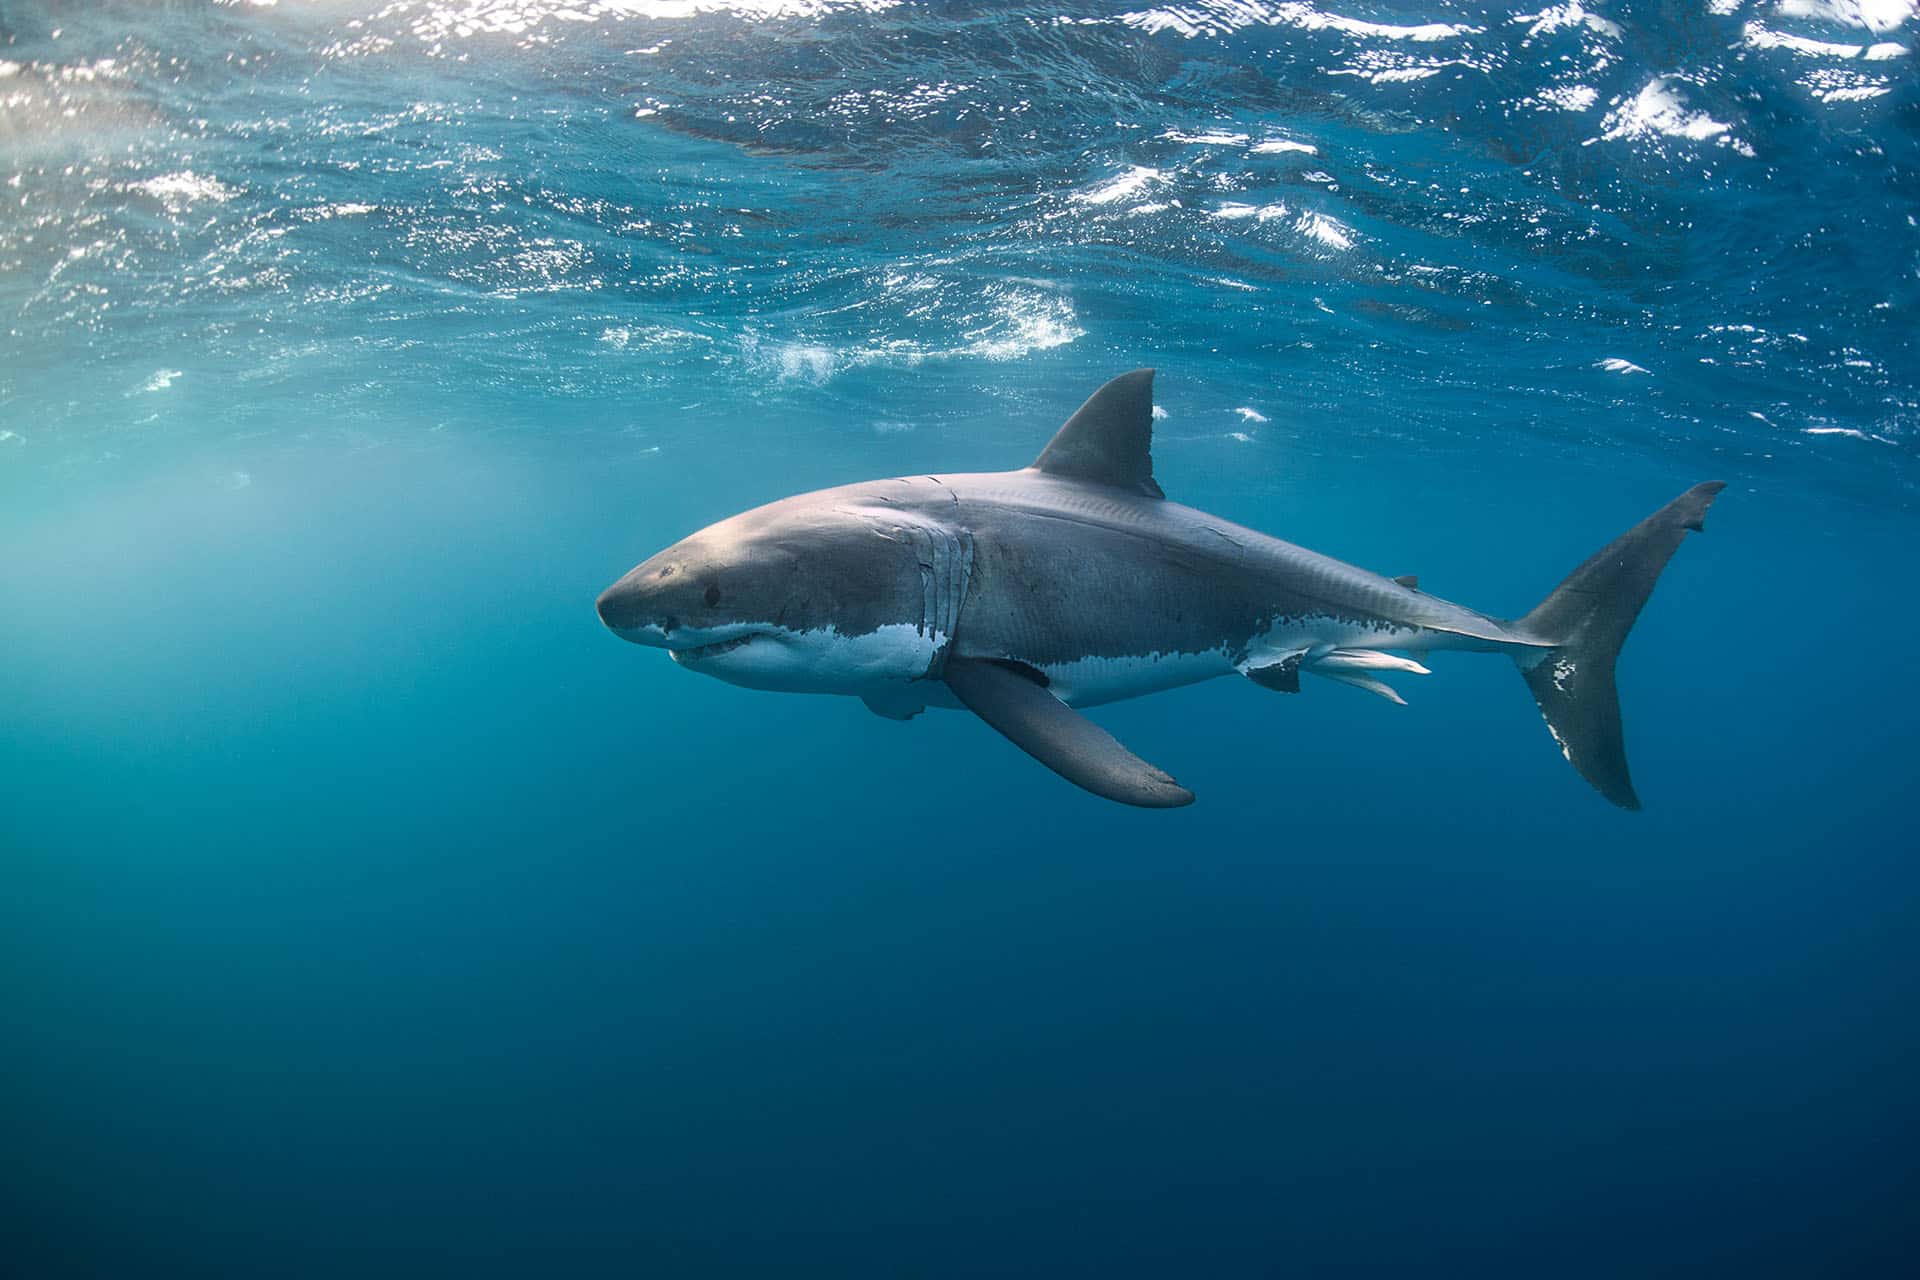 A large great white shark - an animal that makes up the Marine Big Five in South Africa.